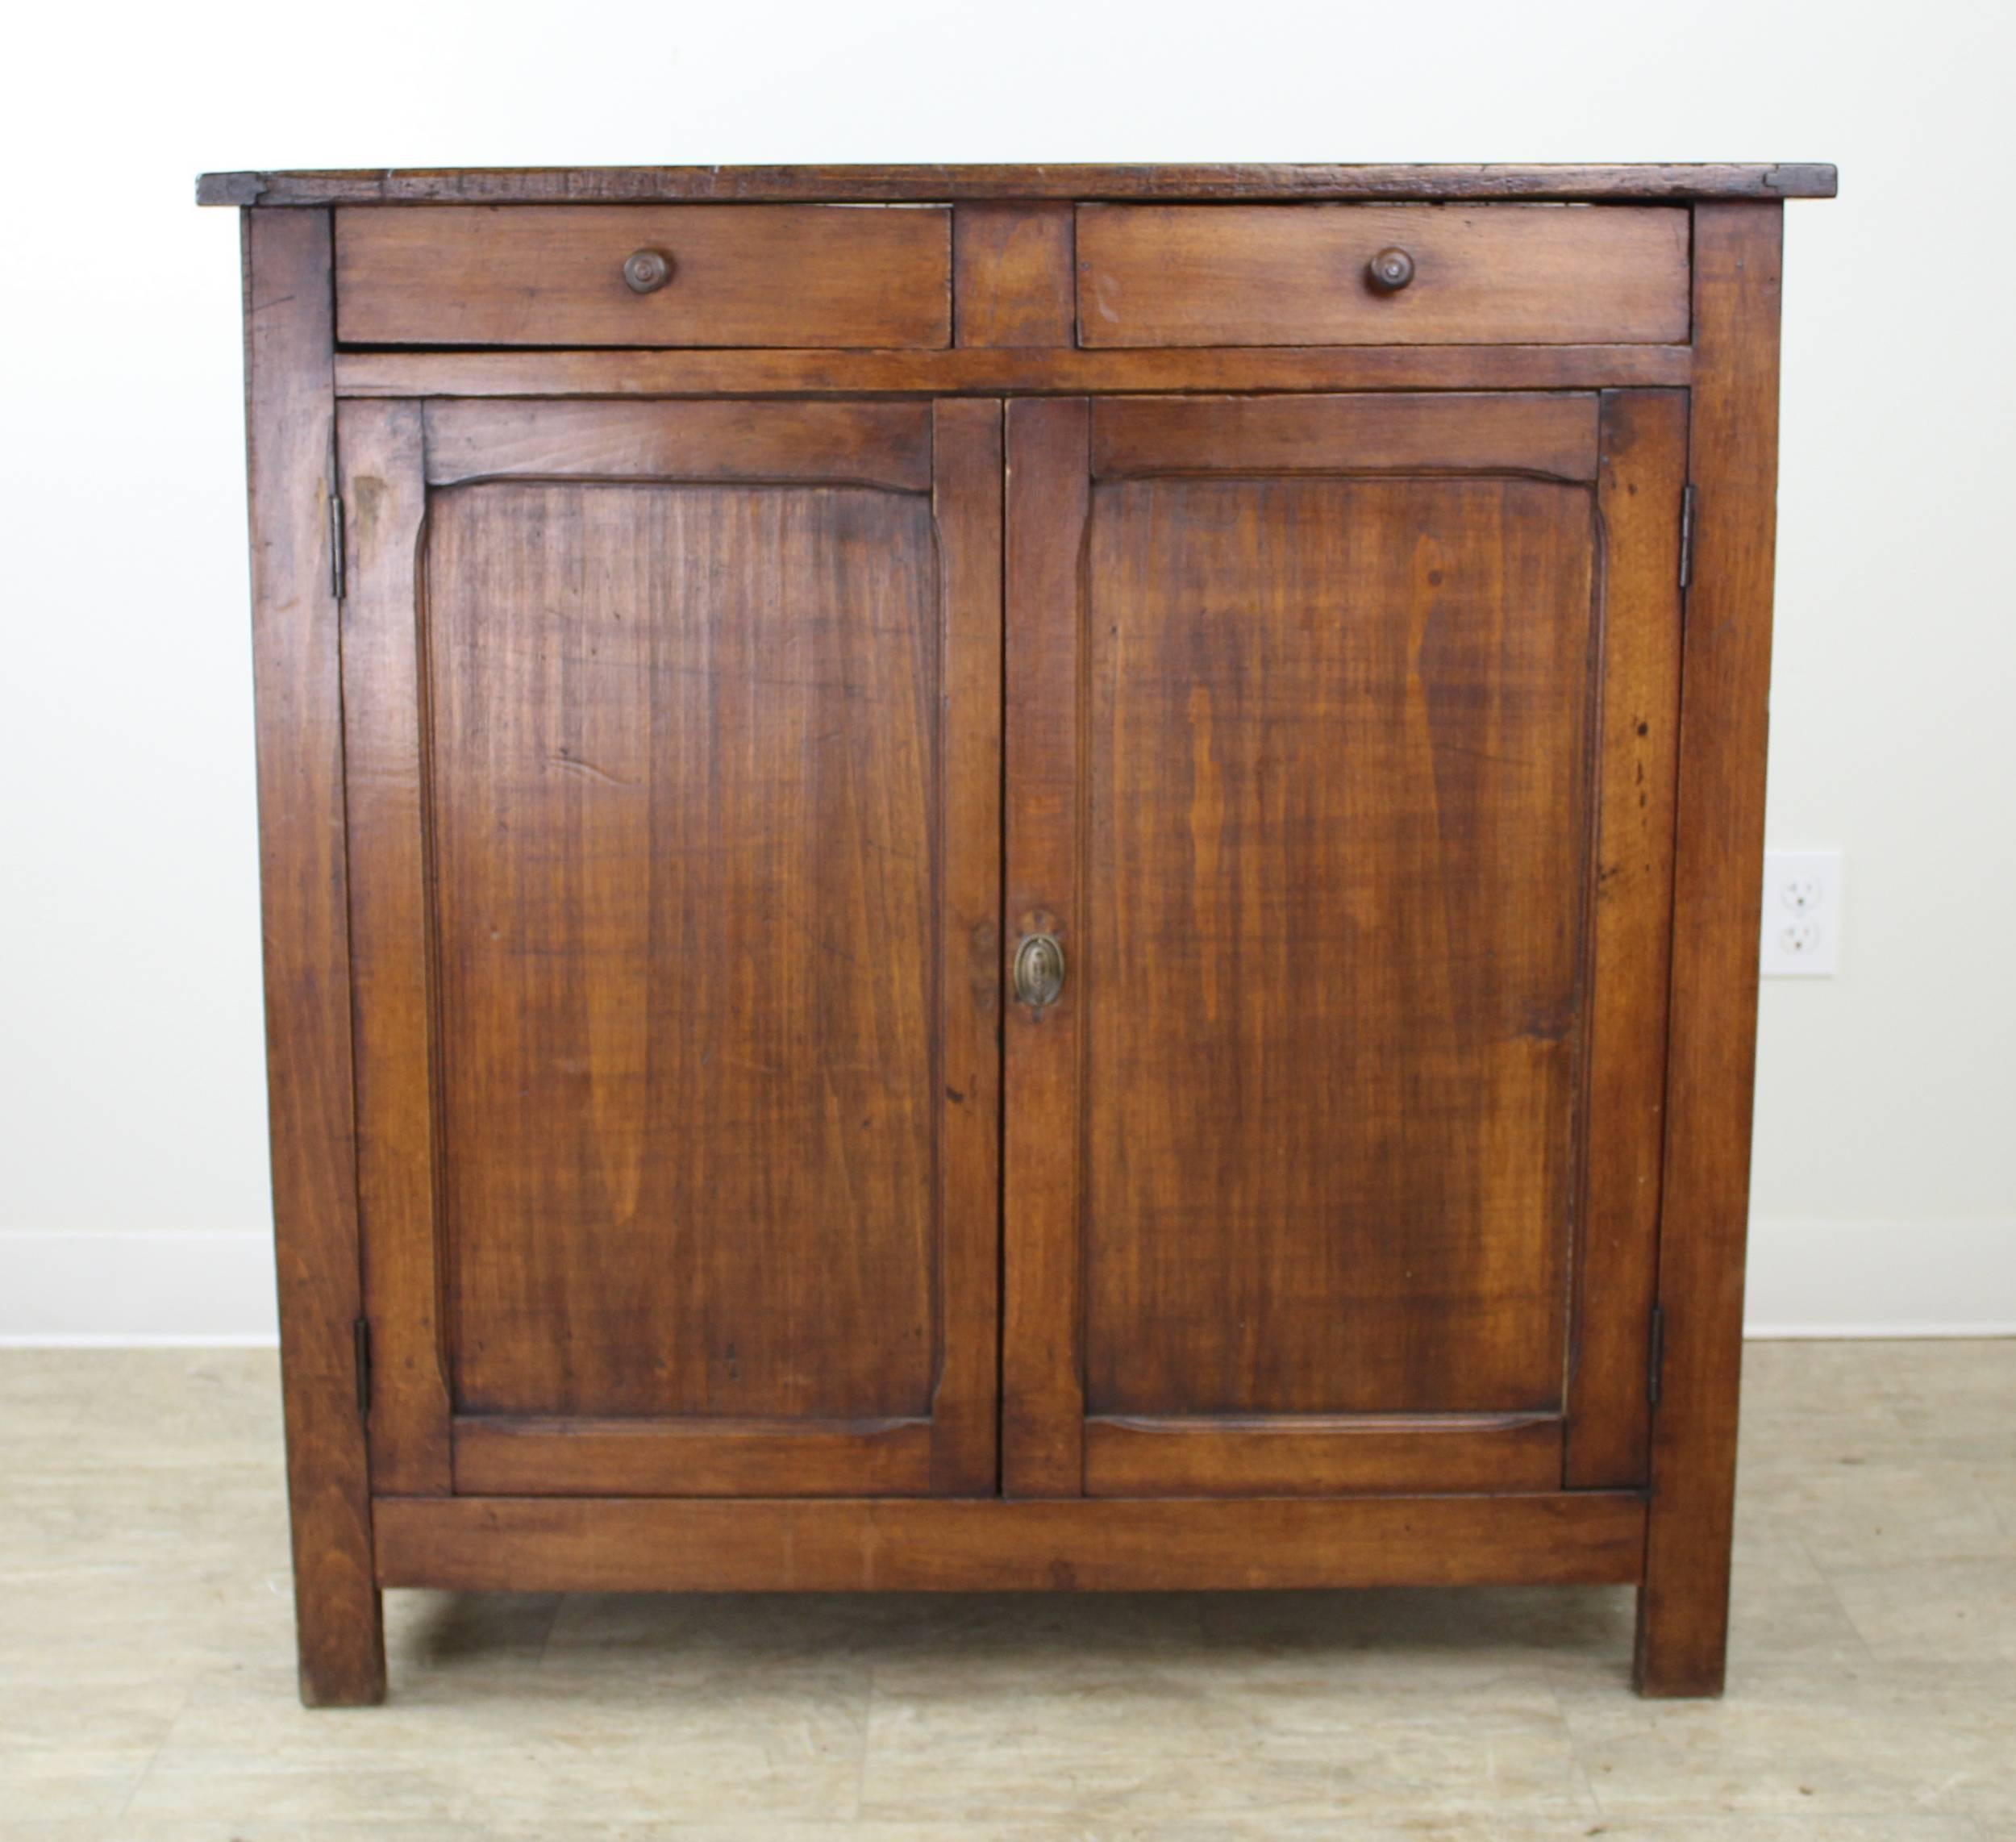 A tall, slim fruitwood server, sideboard or buffet from France. Two roomy drawers atop a two shelf cabinet. The lock and key are in very good working condition. Inset panels with carved edges, as seen in image #8 add attractive detail.